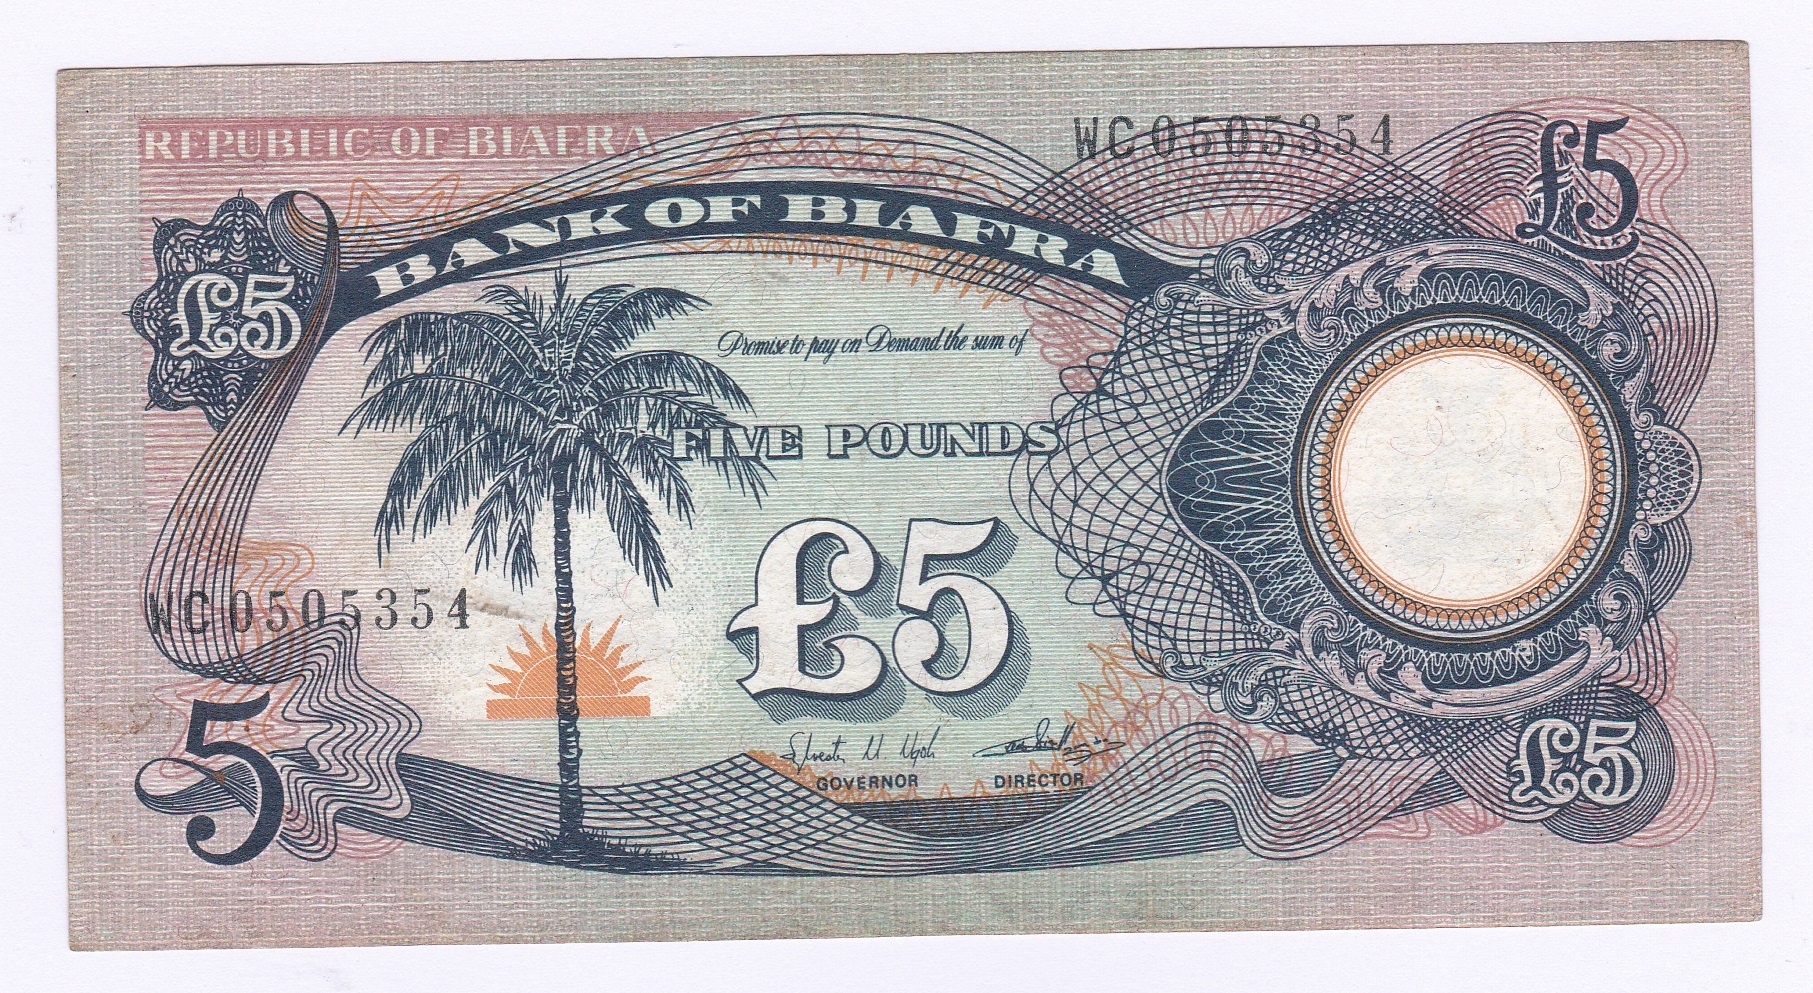 Biafra - 1968/9 (ND) 5 Pounds Ref: P6a, Grade VF+.